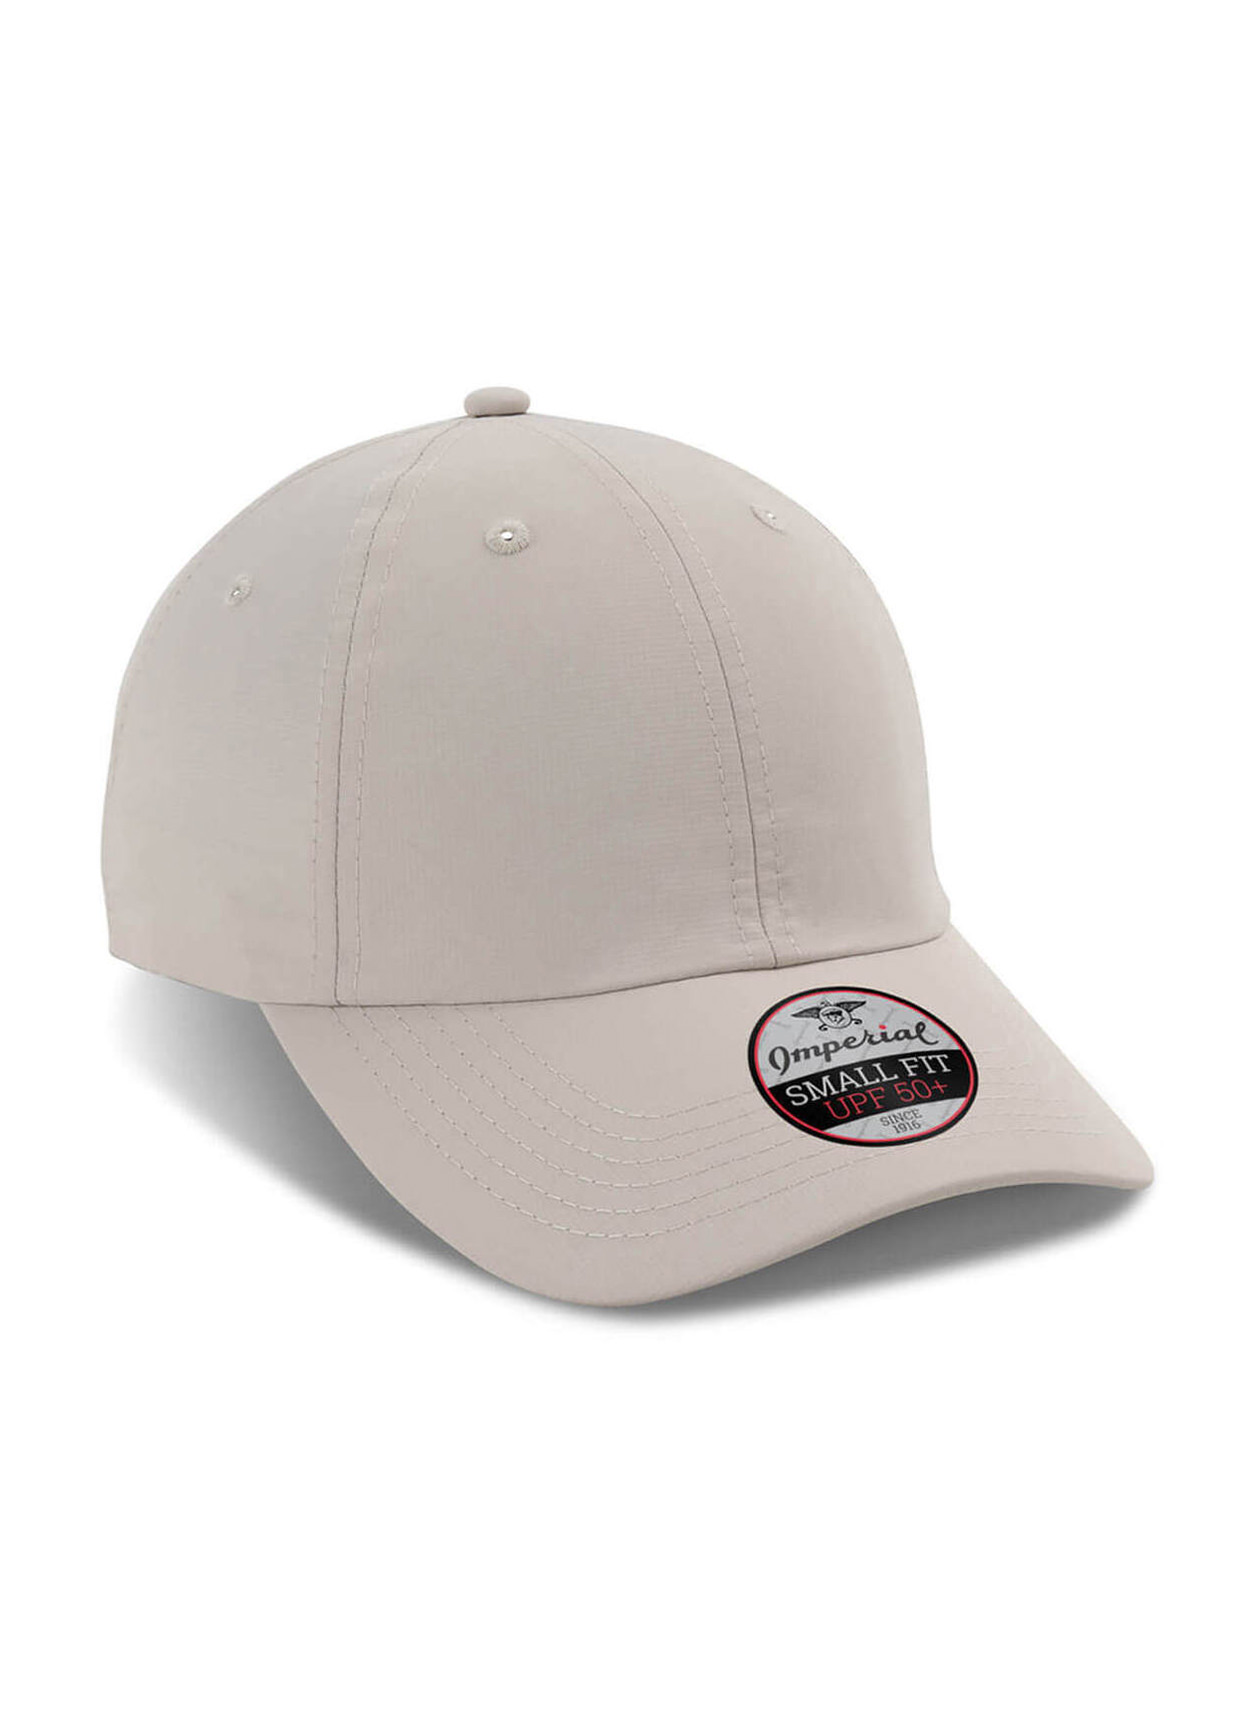 Imperial Putty Original Small Fit Performance Hat